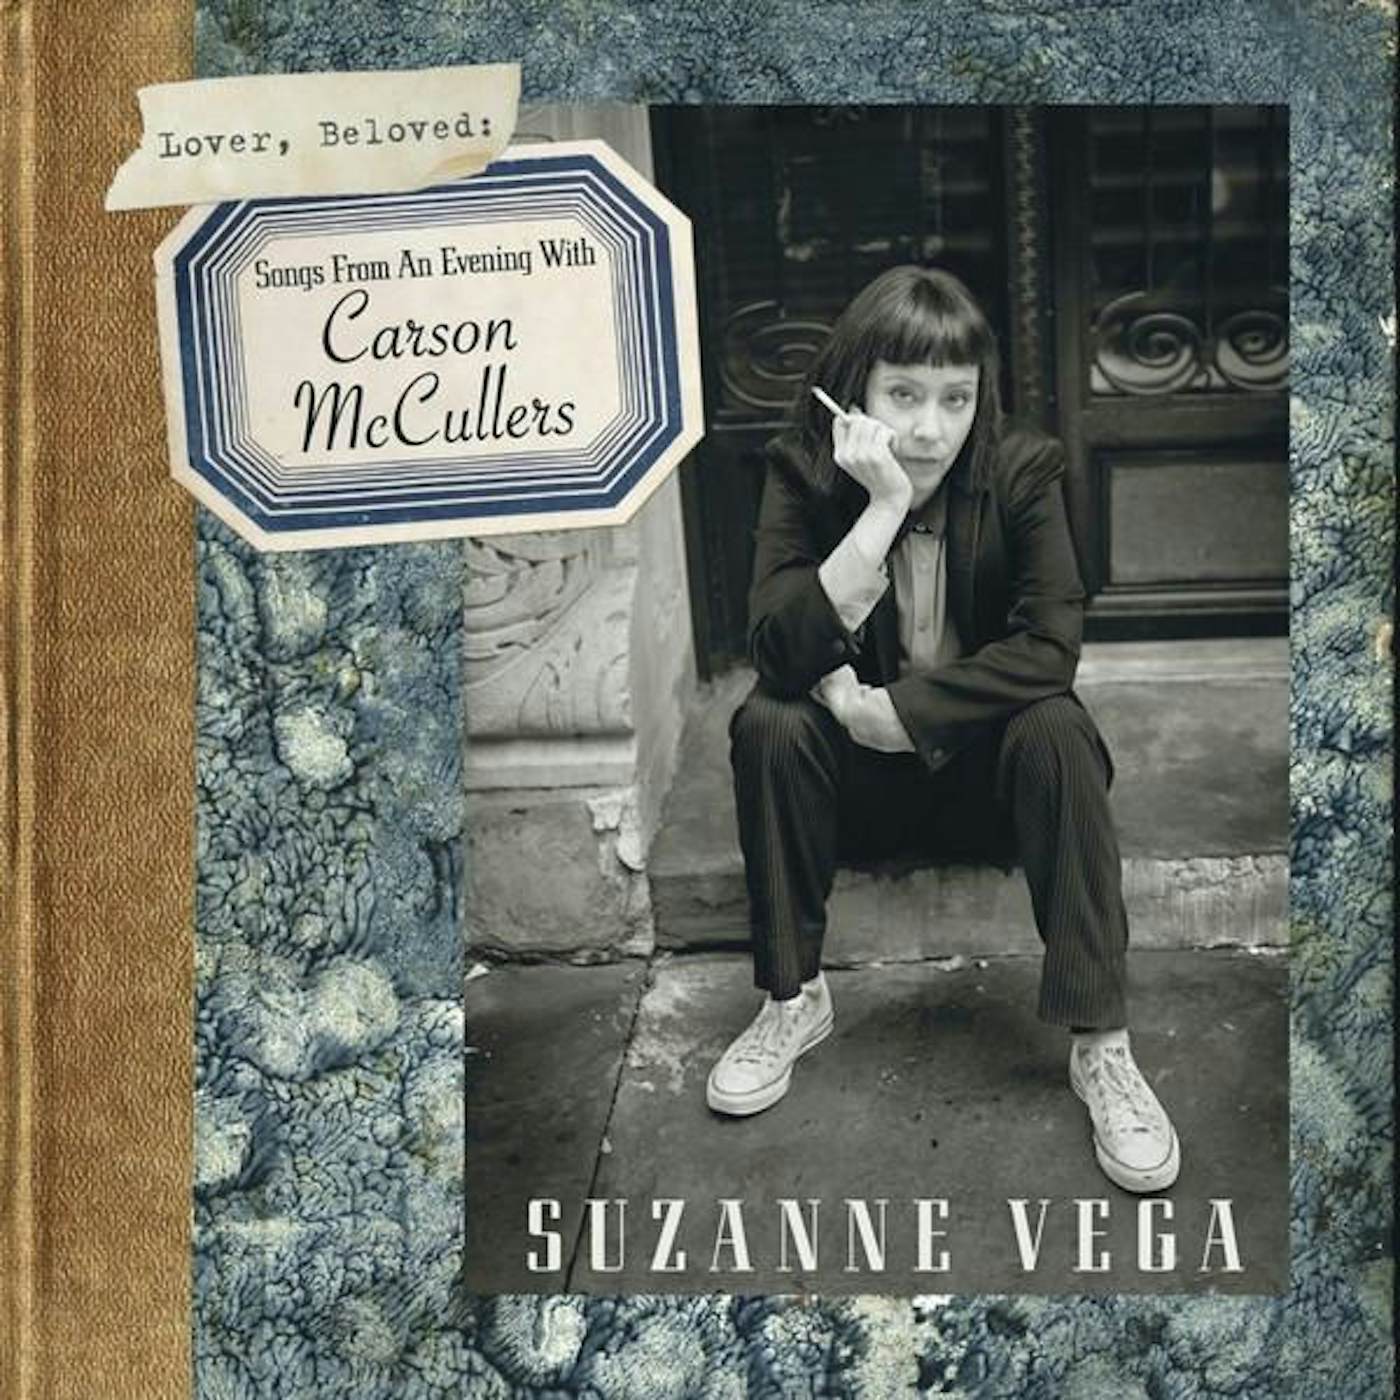 Suzanne Vega LOVER BELOVED: SONGS FROM AN EVENING WITH CARSON MCCULLERS Vinyl Record